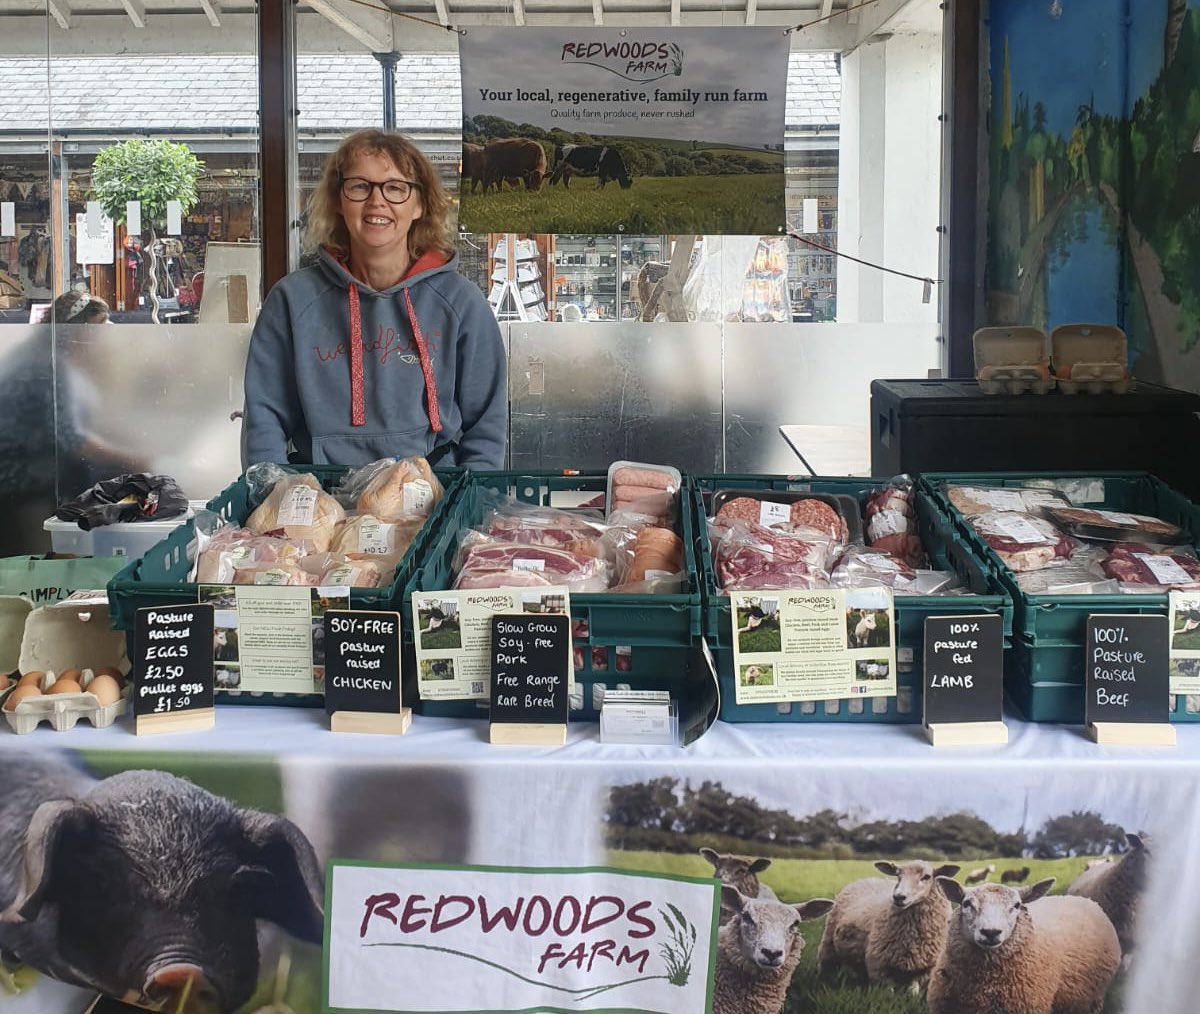 Pauline will be back @TivertonMarket #FarmersMarket 9am to 2pm today. Come & see us for your regeneratively farmed soy free & pastured produce 🐓🐖🐑🐄🥚